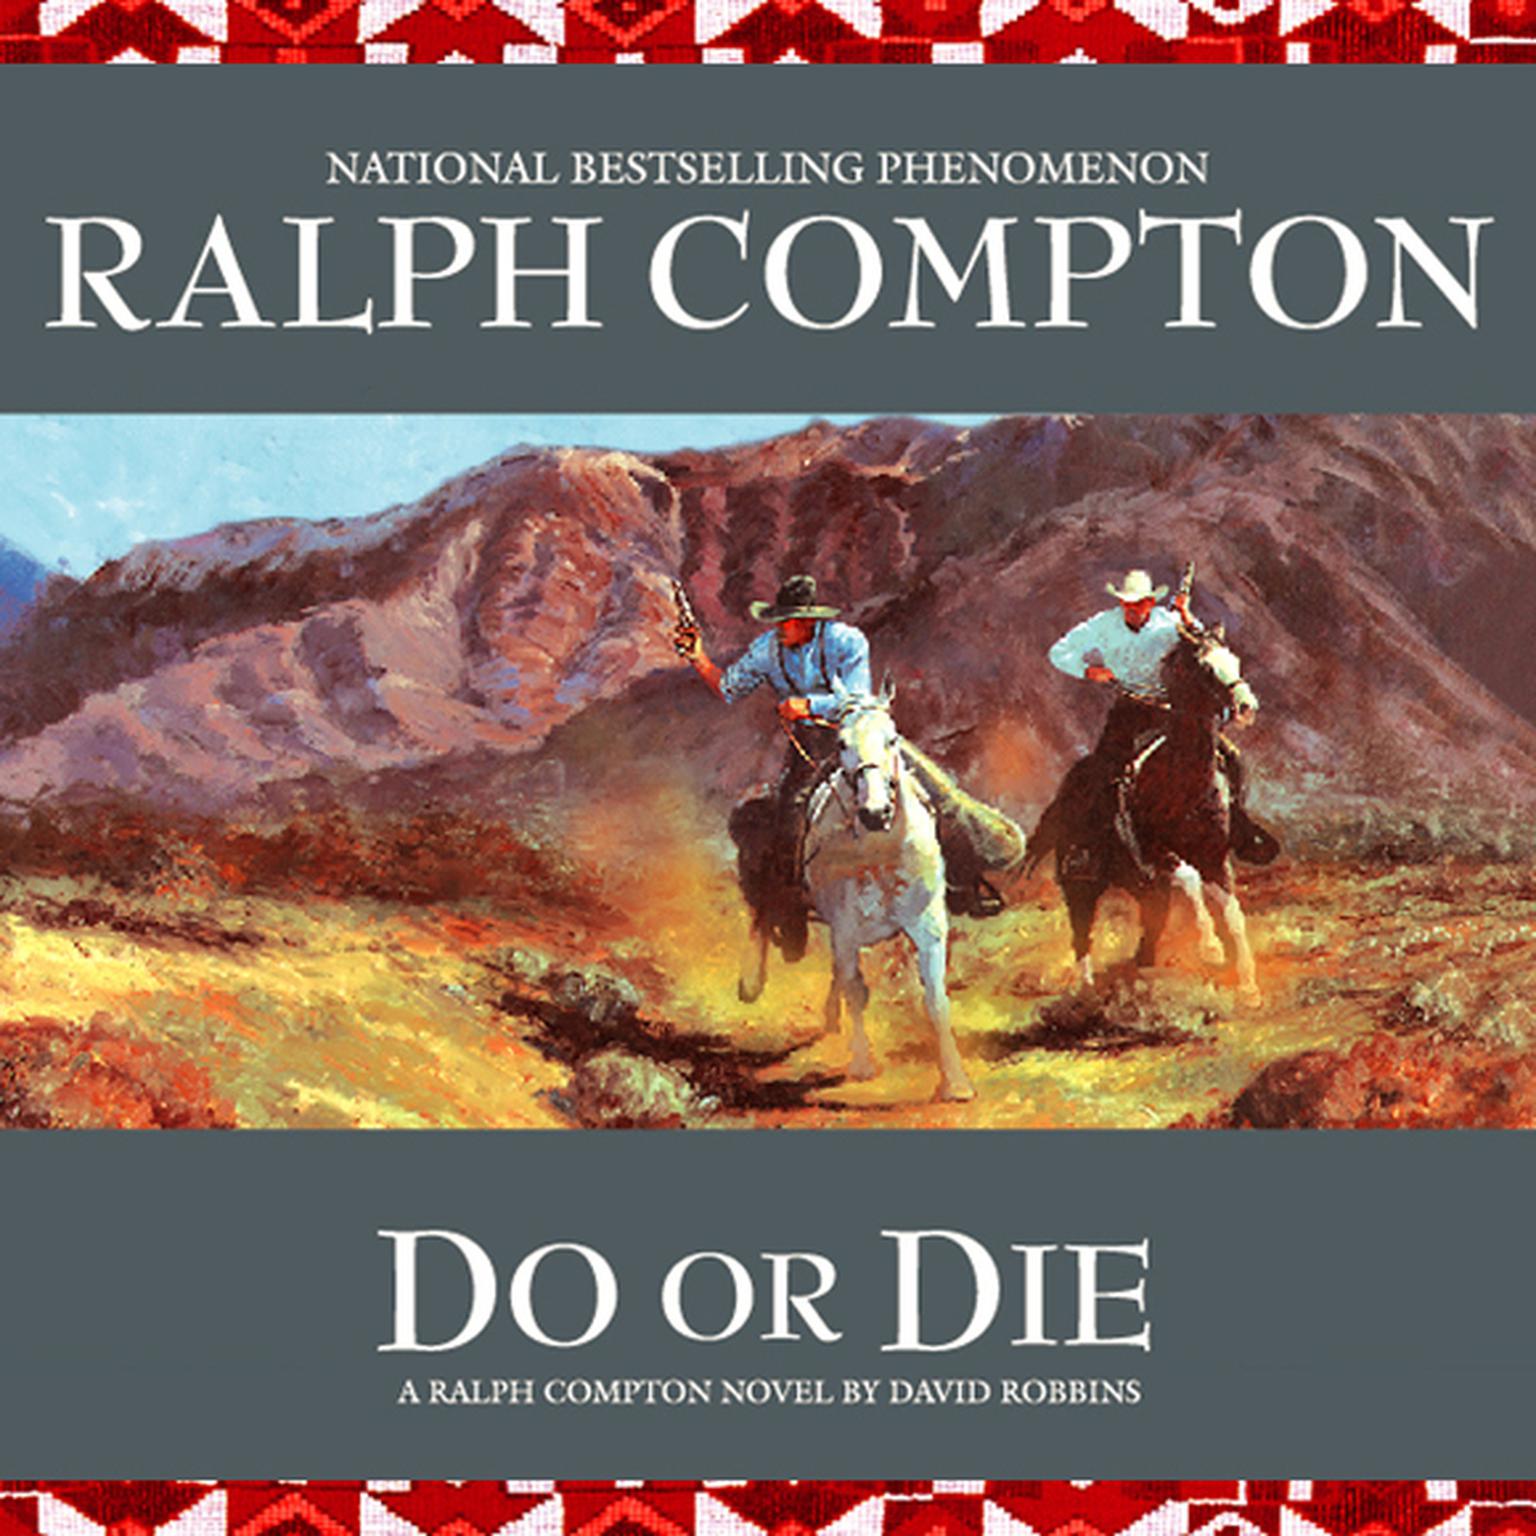 Do or Die (Abridged): A Ralph Compton Novel by David Robbins Audiobook, by Ralph Compton